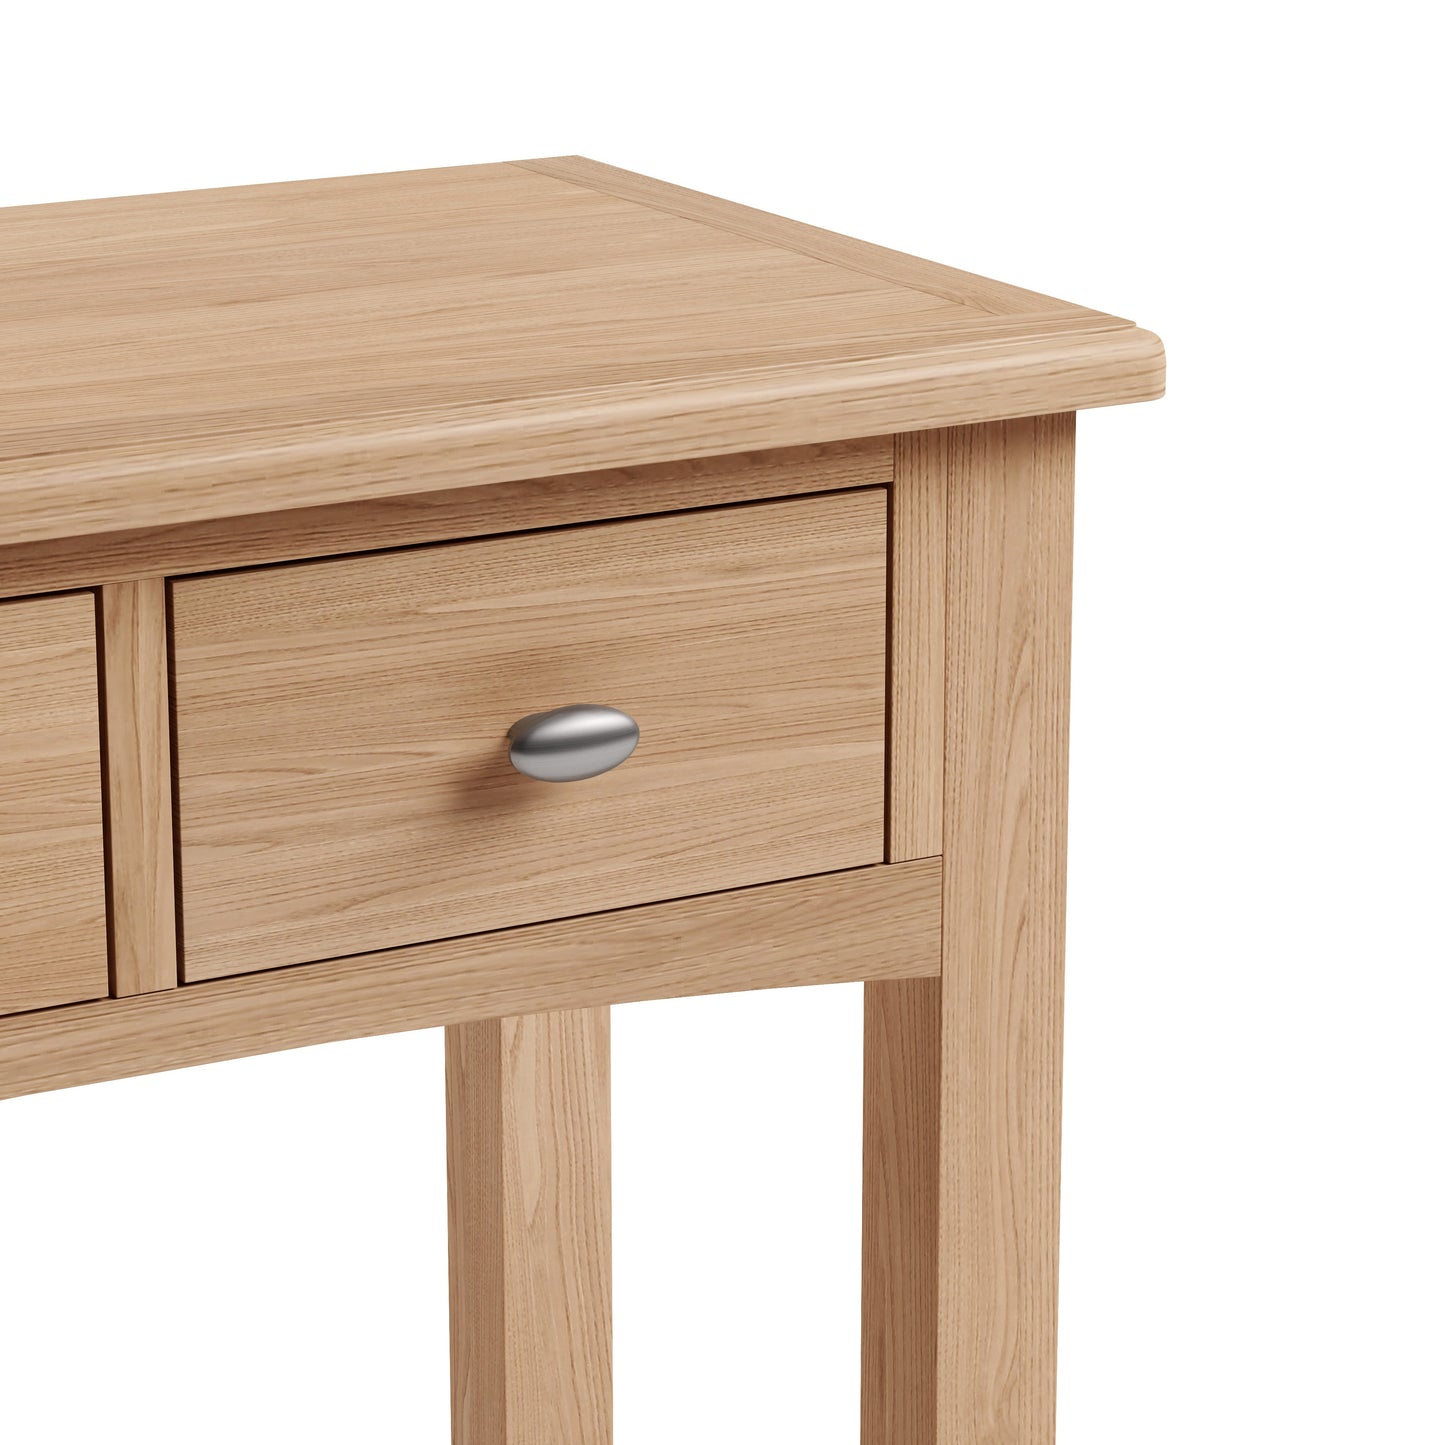 Guildford Dressing Table